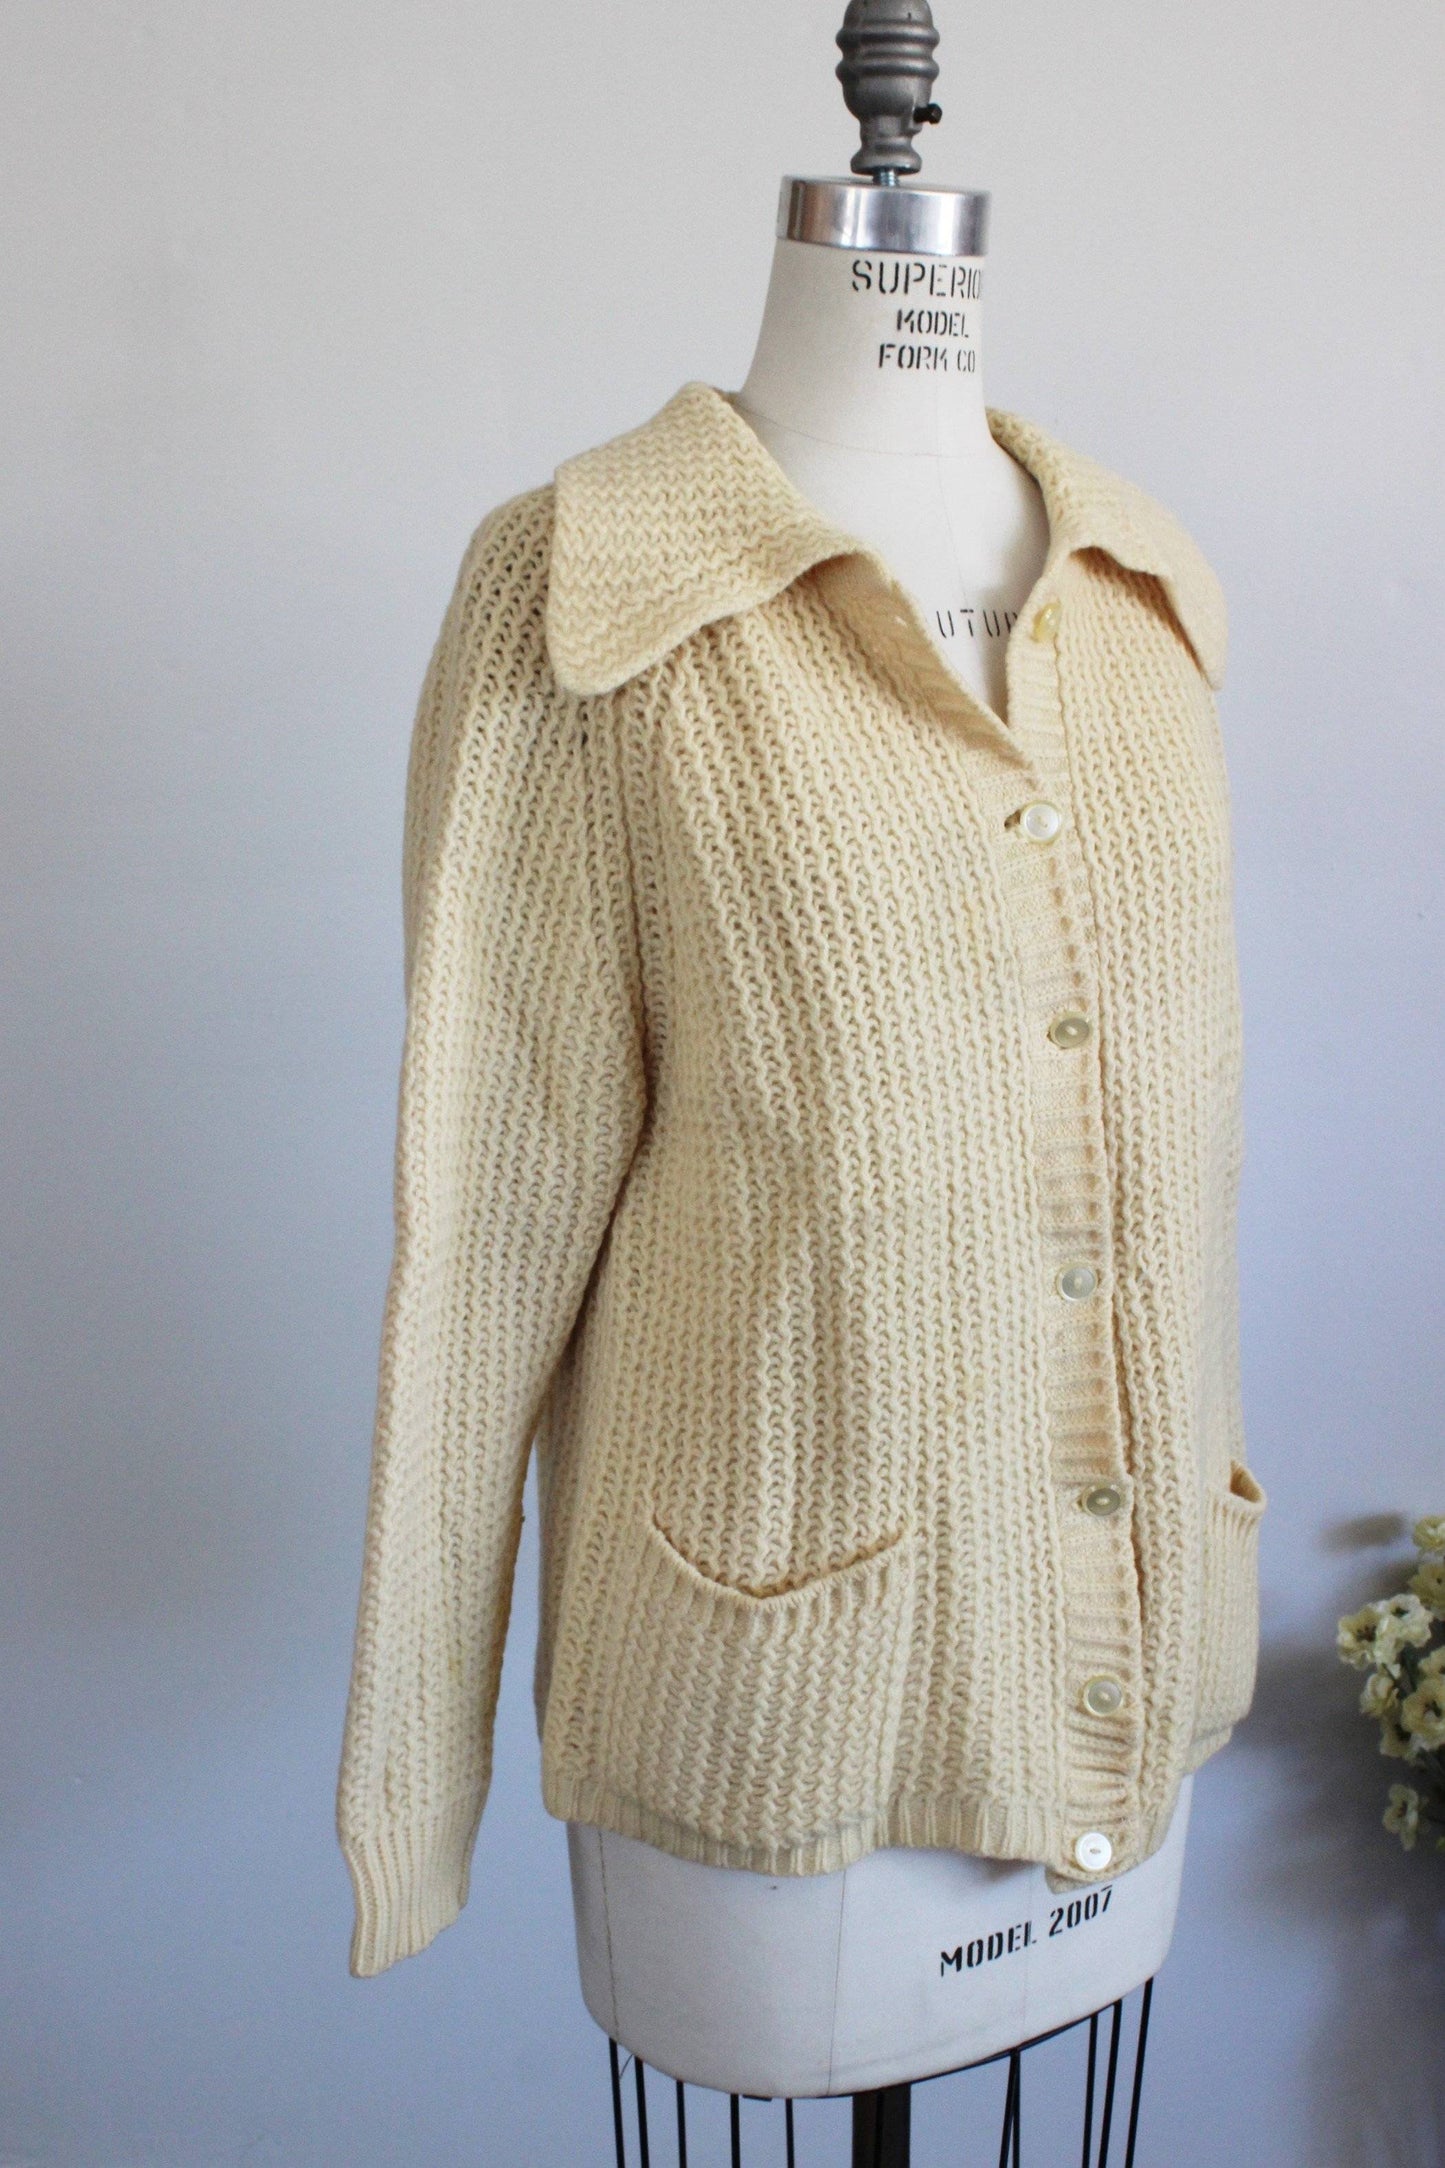 Vintage 1960s Yellow Cardigan Sweater with Pockets by Lerner Shops ...